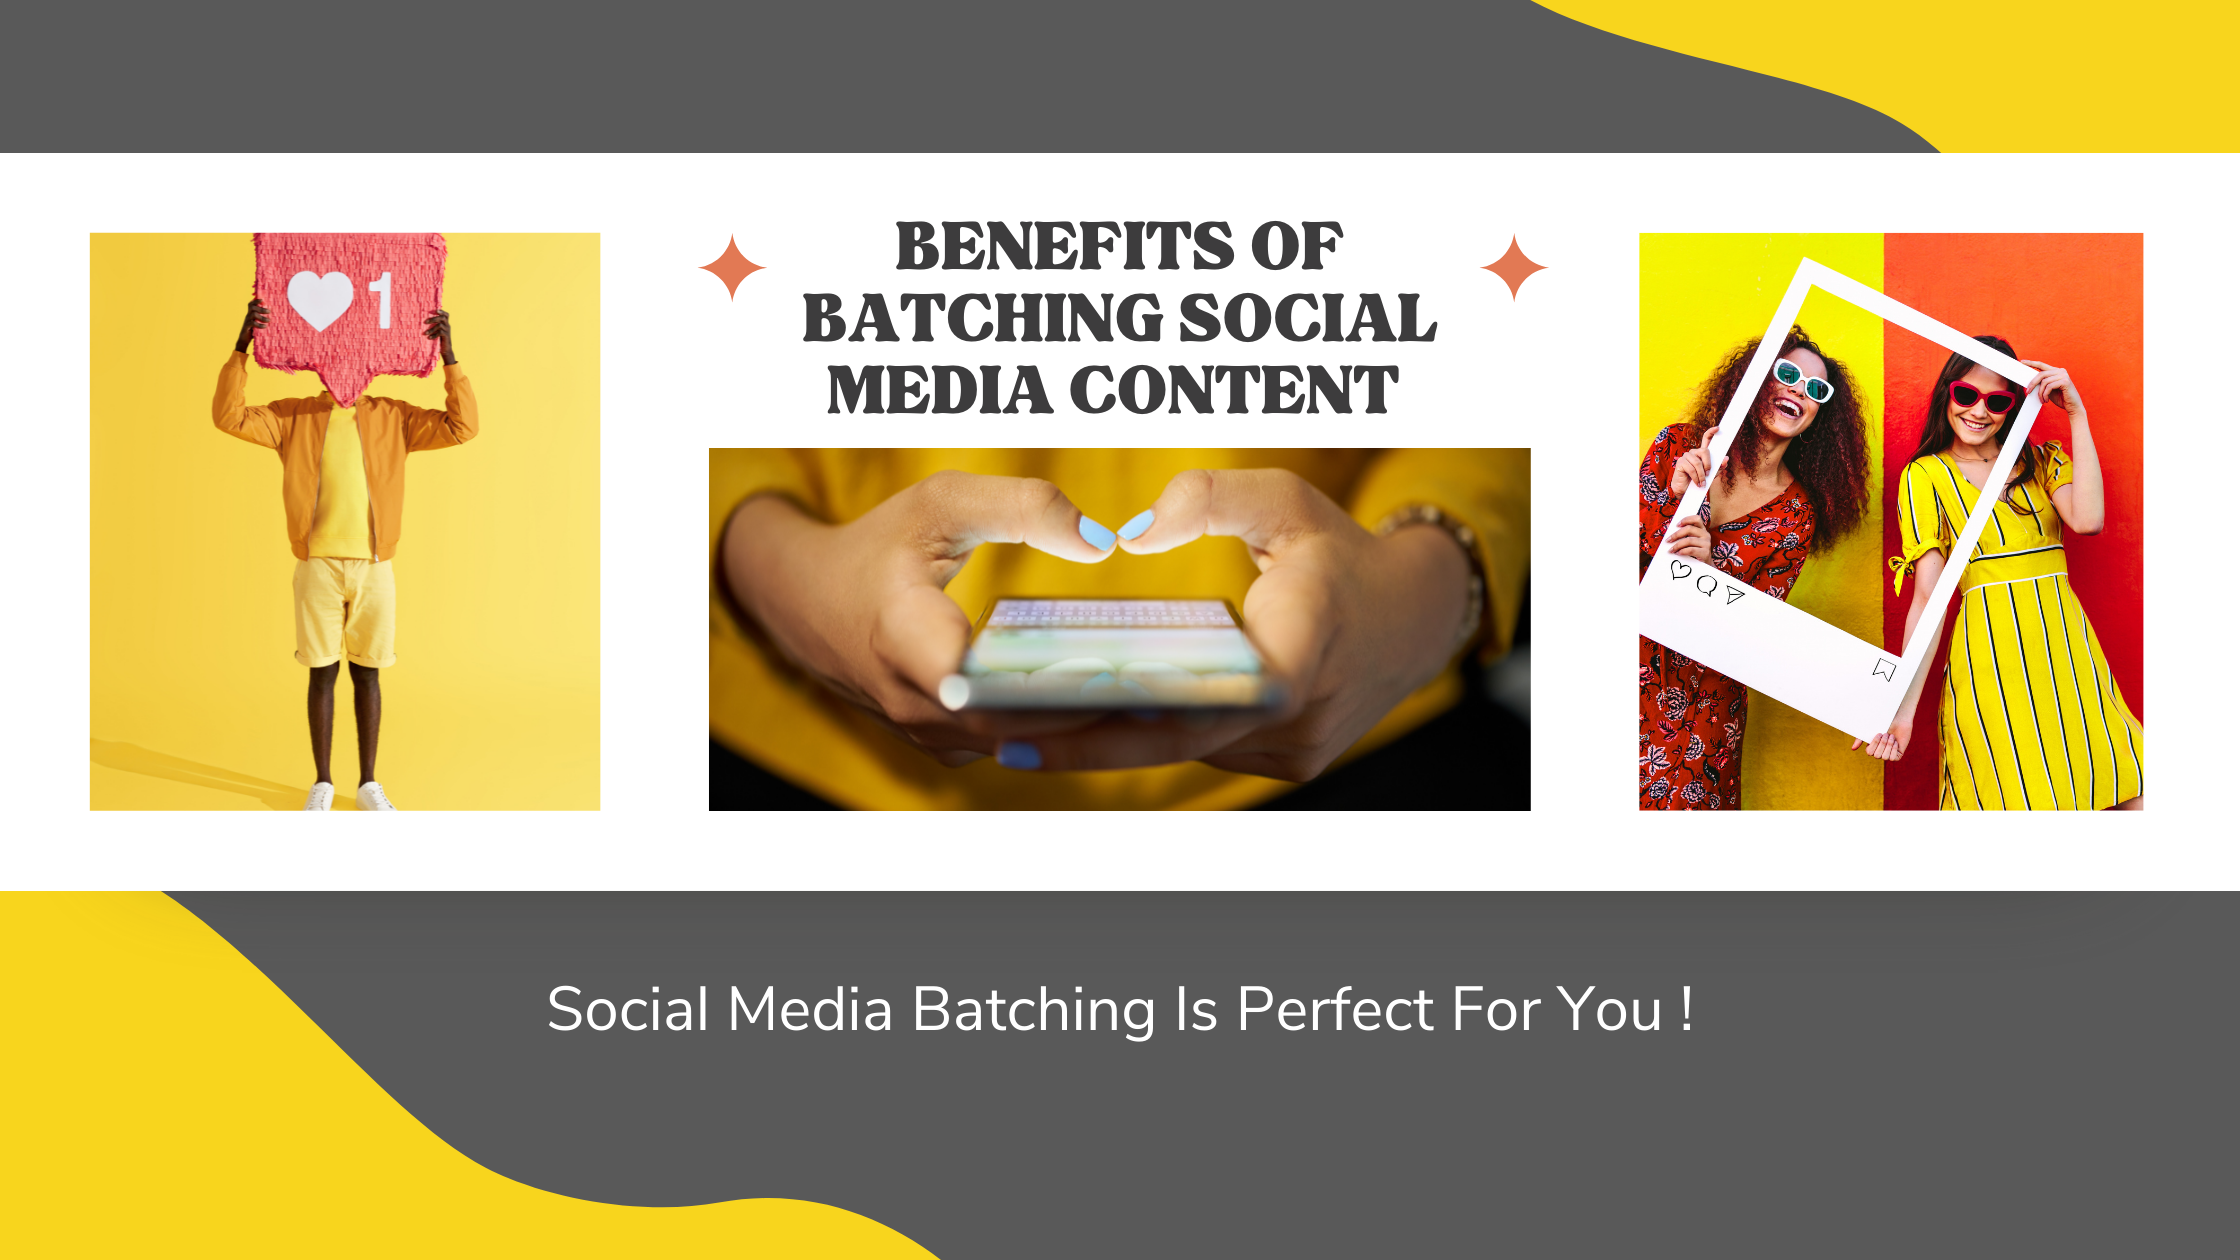 Are You Batching Social Media Content?